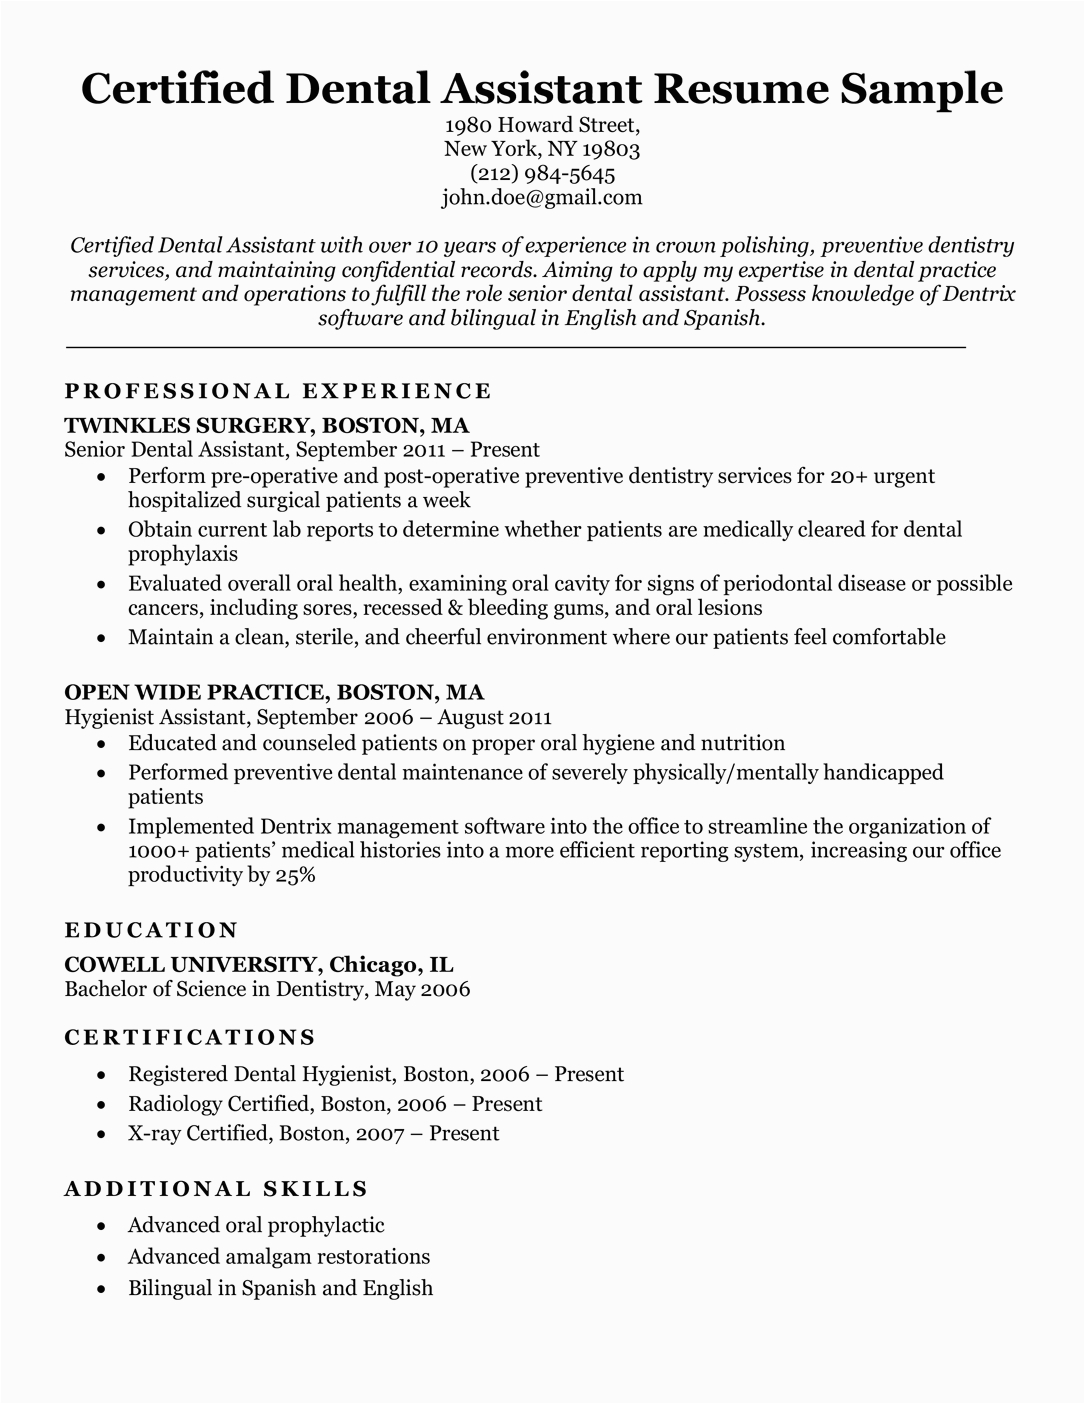 Sample Of Dental assistant Resume with No Experience Dental Resume Examples & Writing Tips